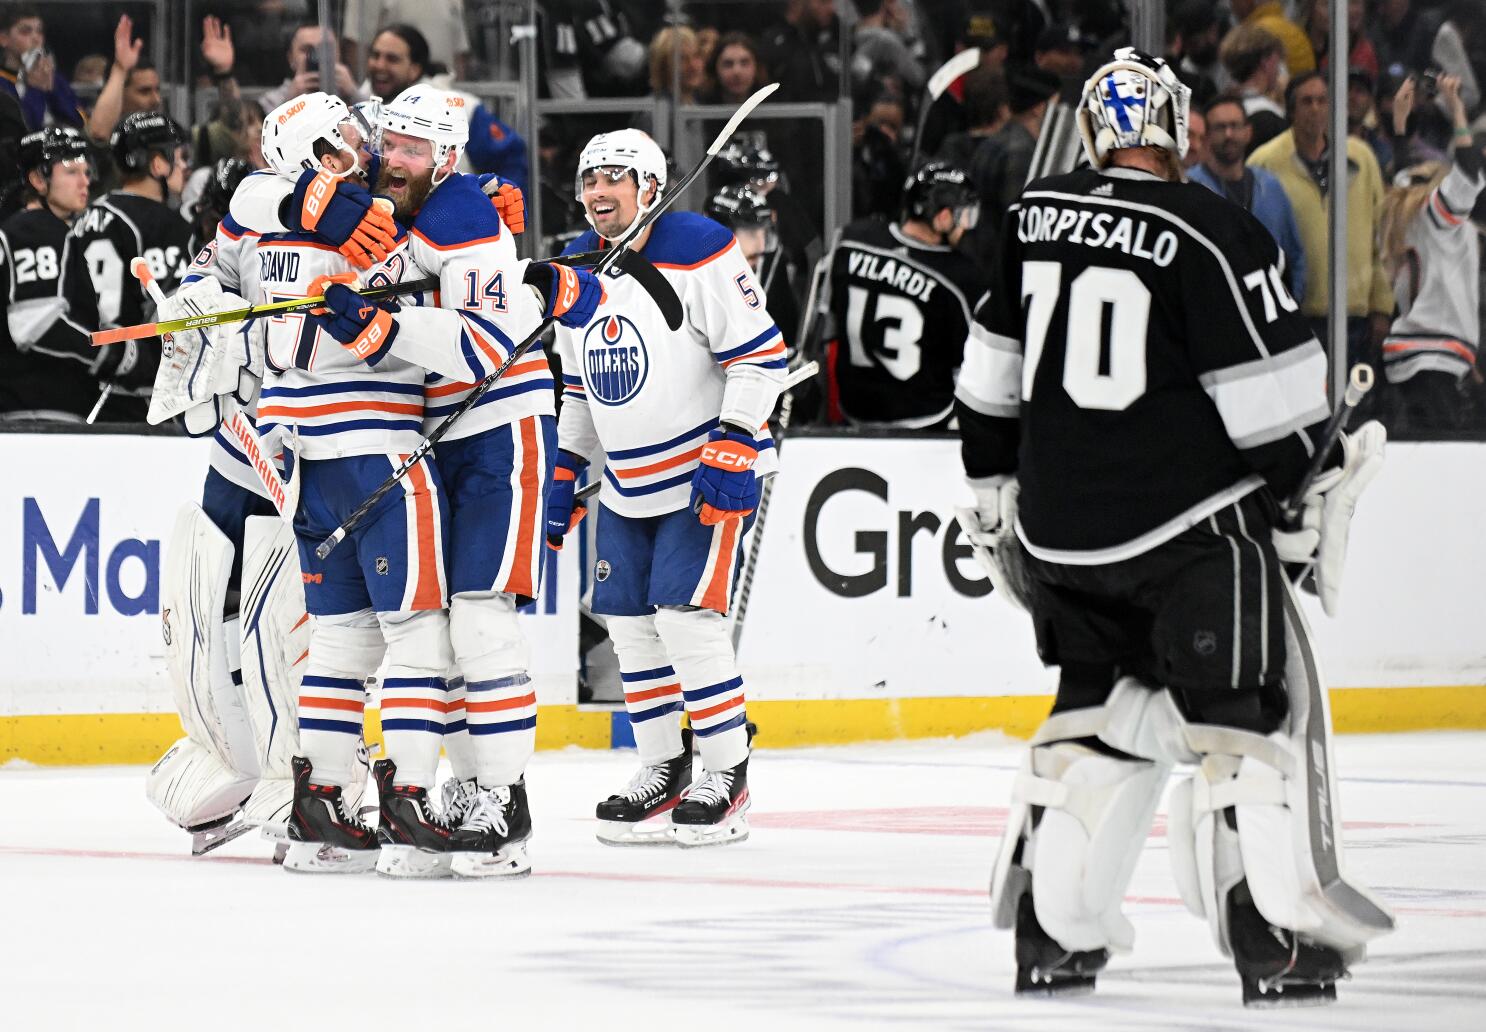 Hyman scores in OT as Oilers rally past Kings in Game 4 to even